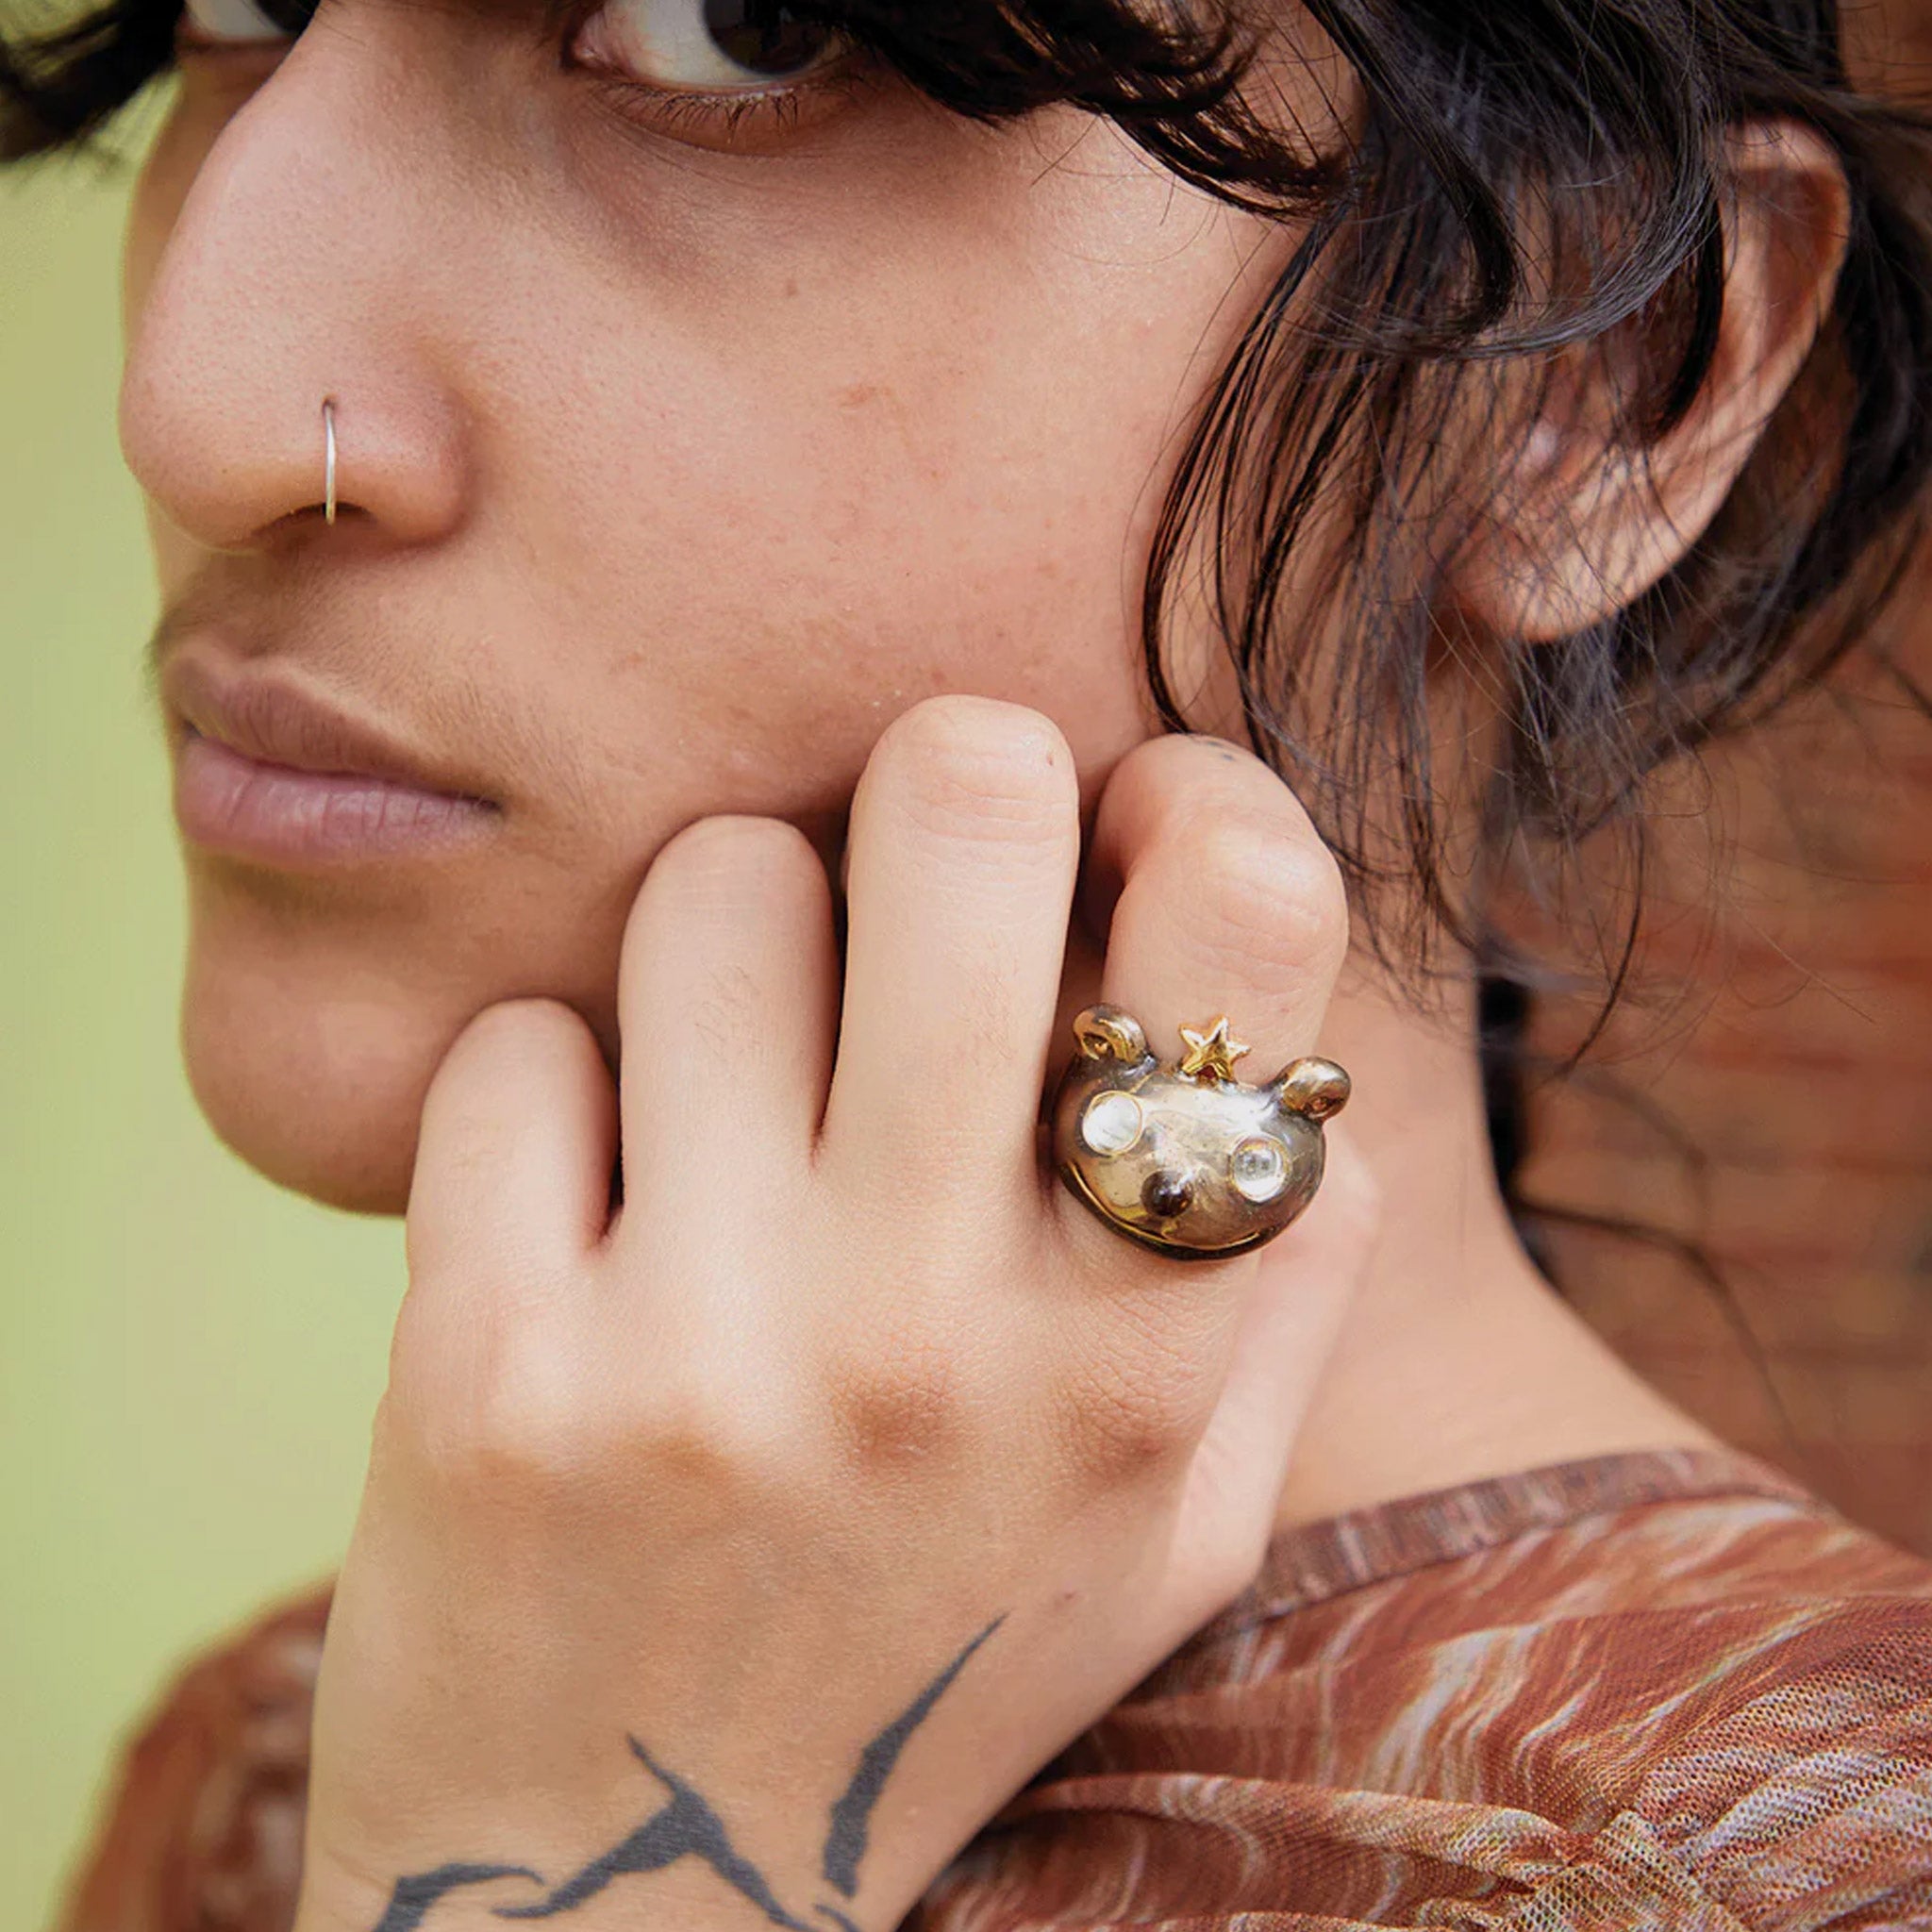 A model wears the Princess Bear Ring in antique gold, a recycled pewter ring shaped like a bear's head wearing a star crown and clear glass eyes.